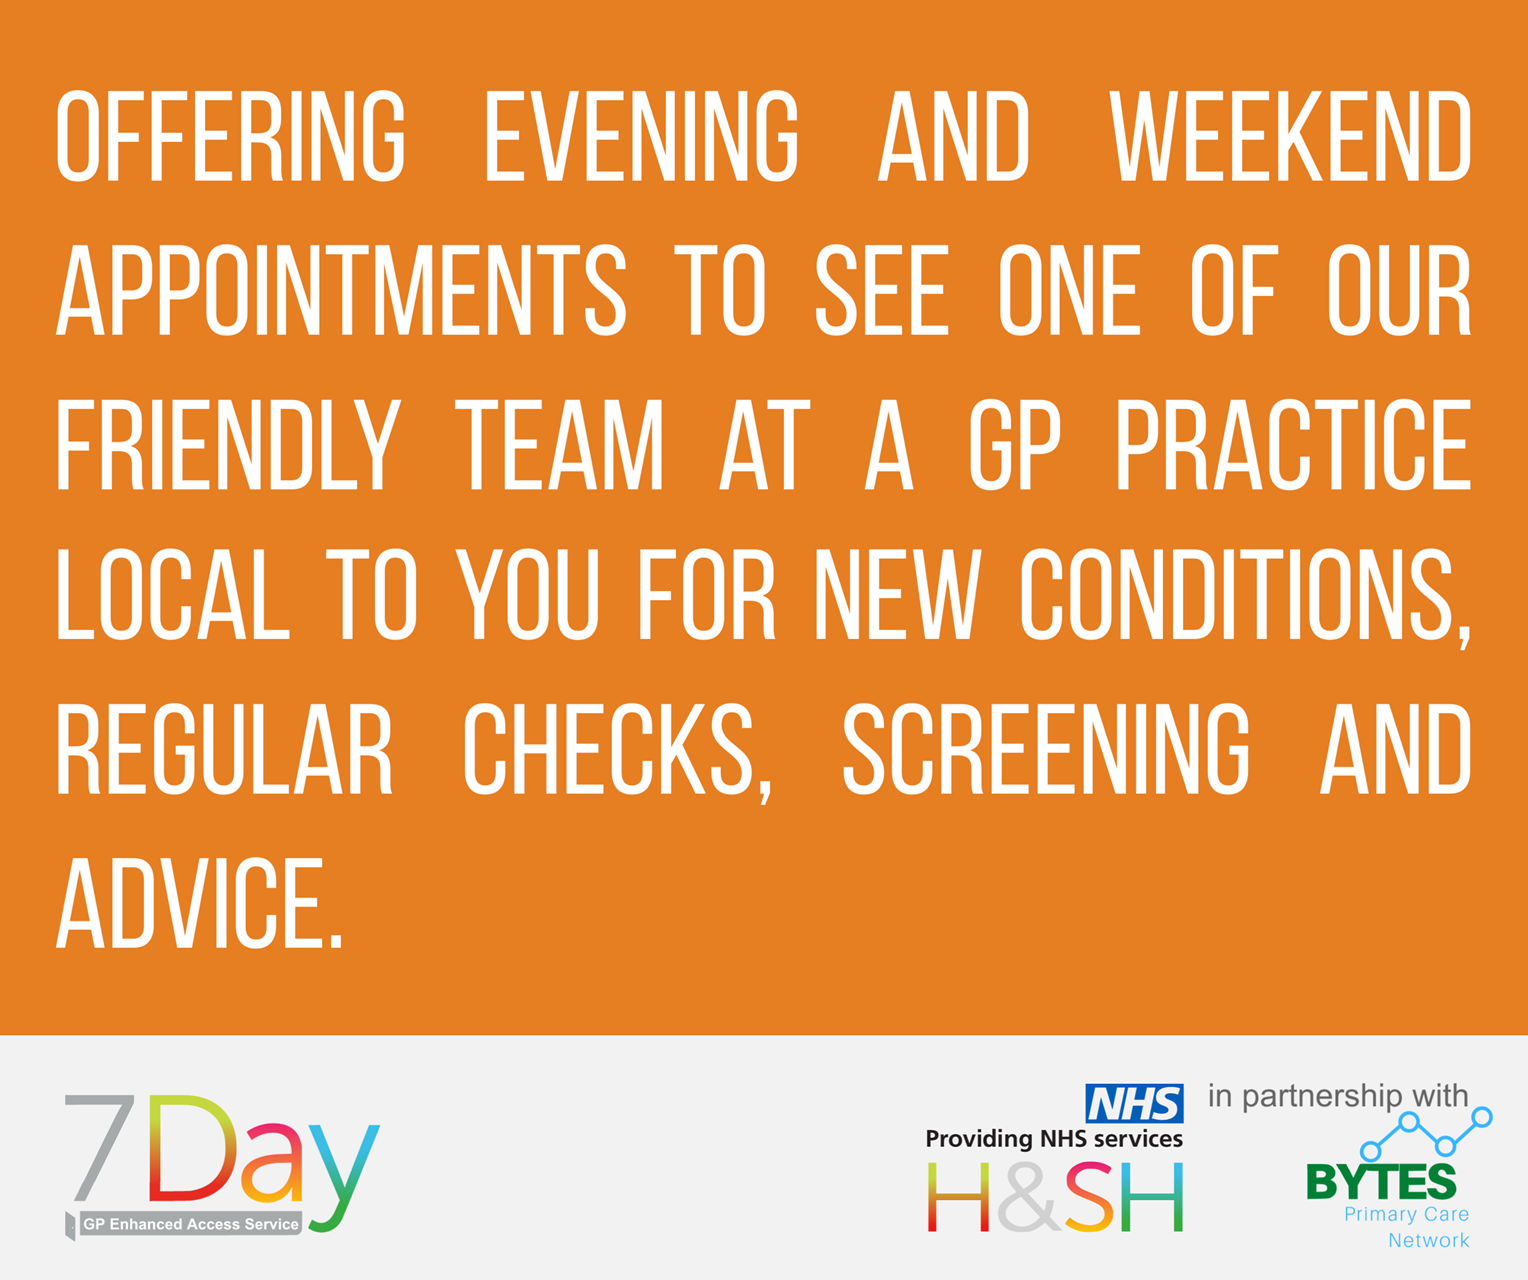 Evening and Weekend Appointments